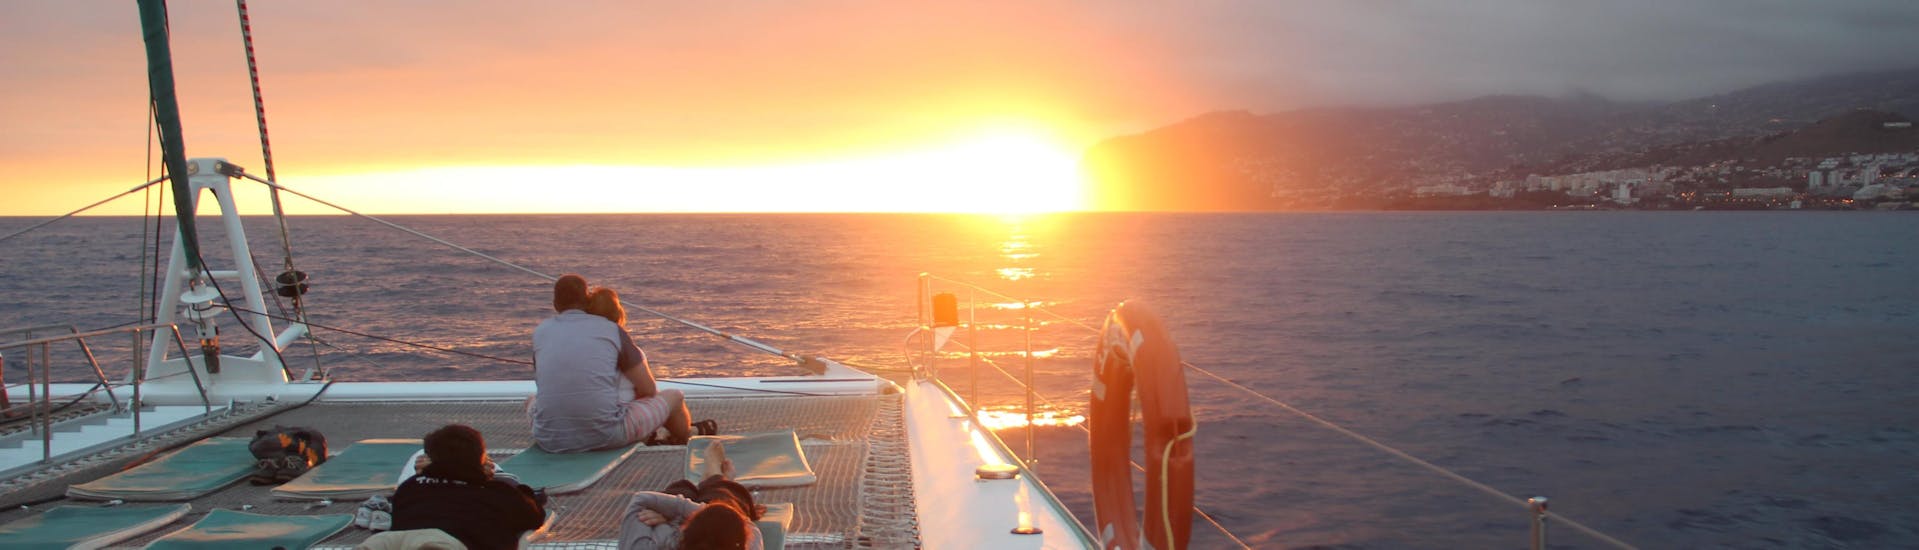 Sunset Catamaran Trip with Dolphin and Whale Watching.